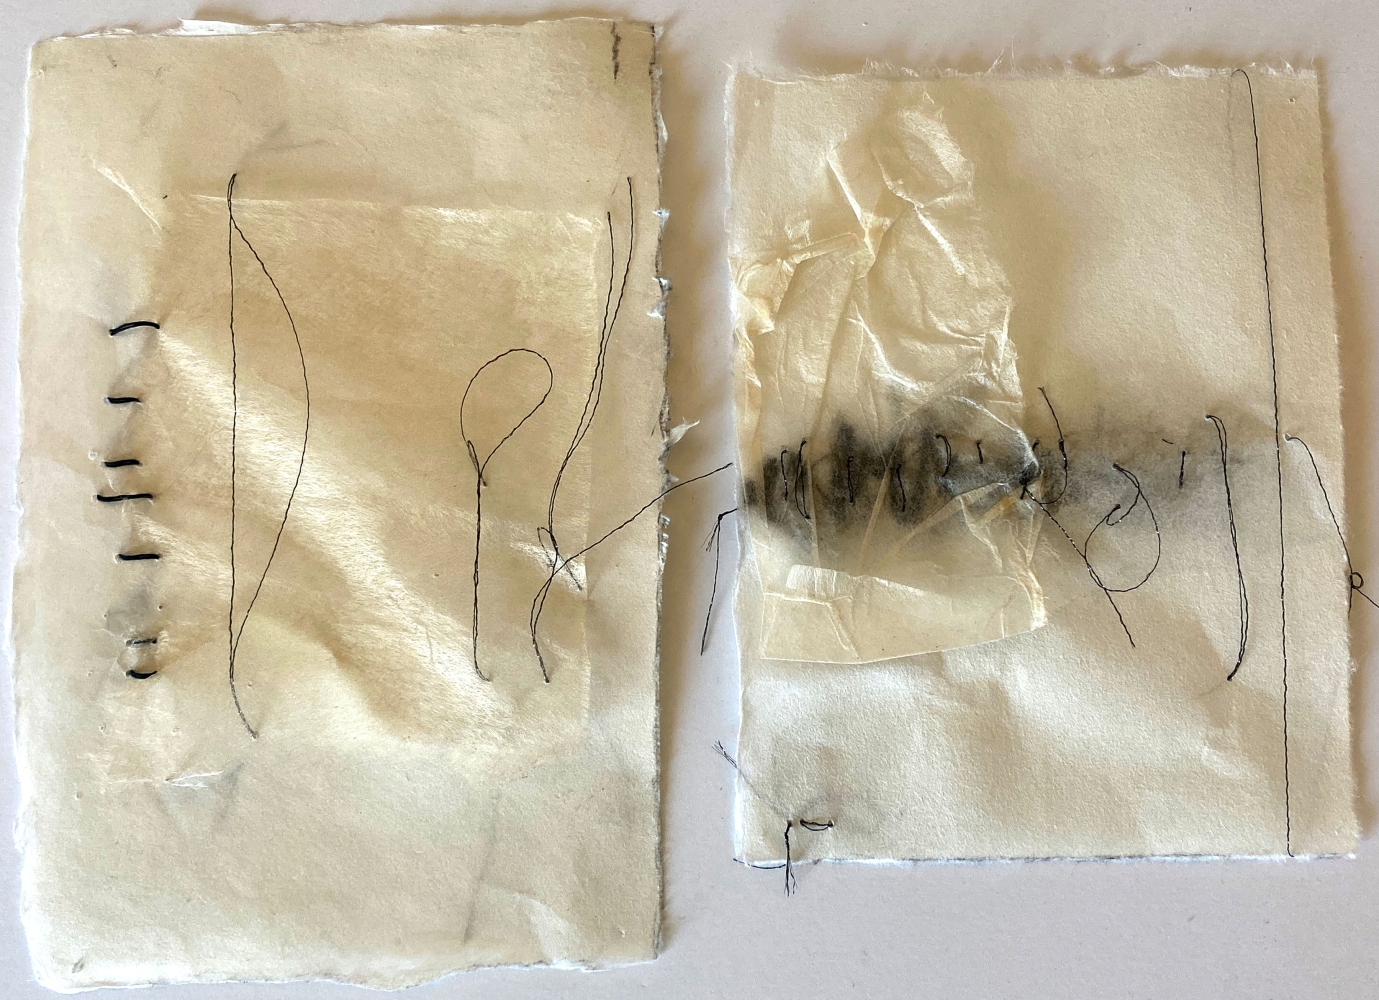 Mixed Feelings (Diptych)  8.25" x 11.5"  Silk, Graphite, And Thread On Paper